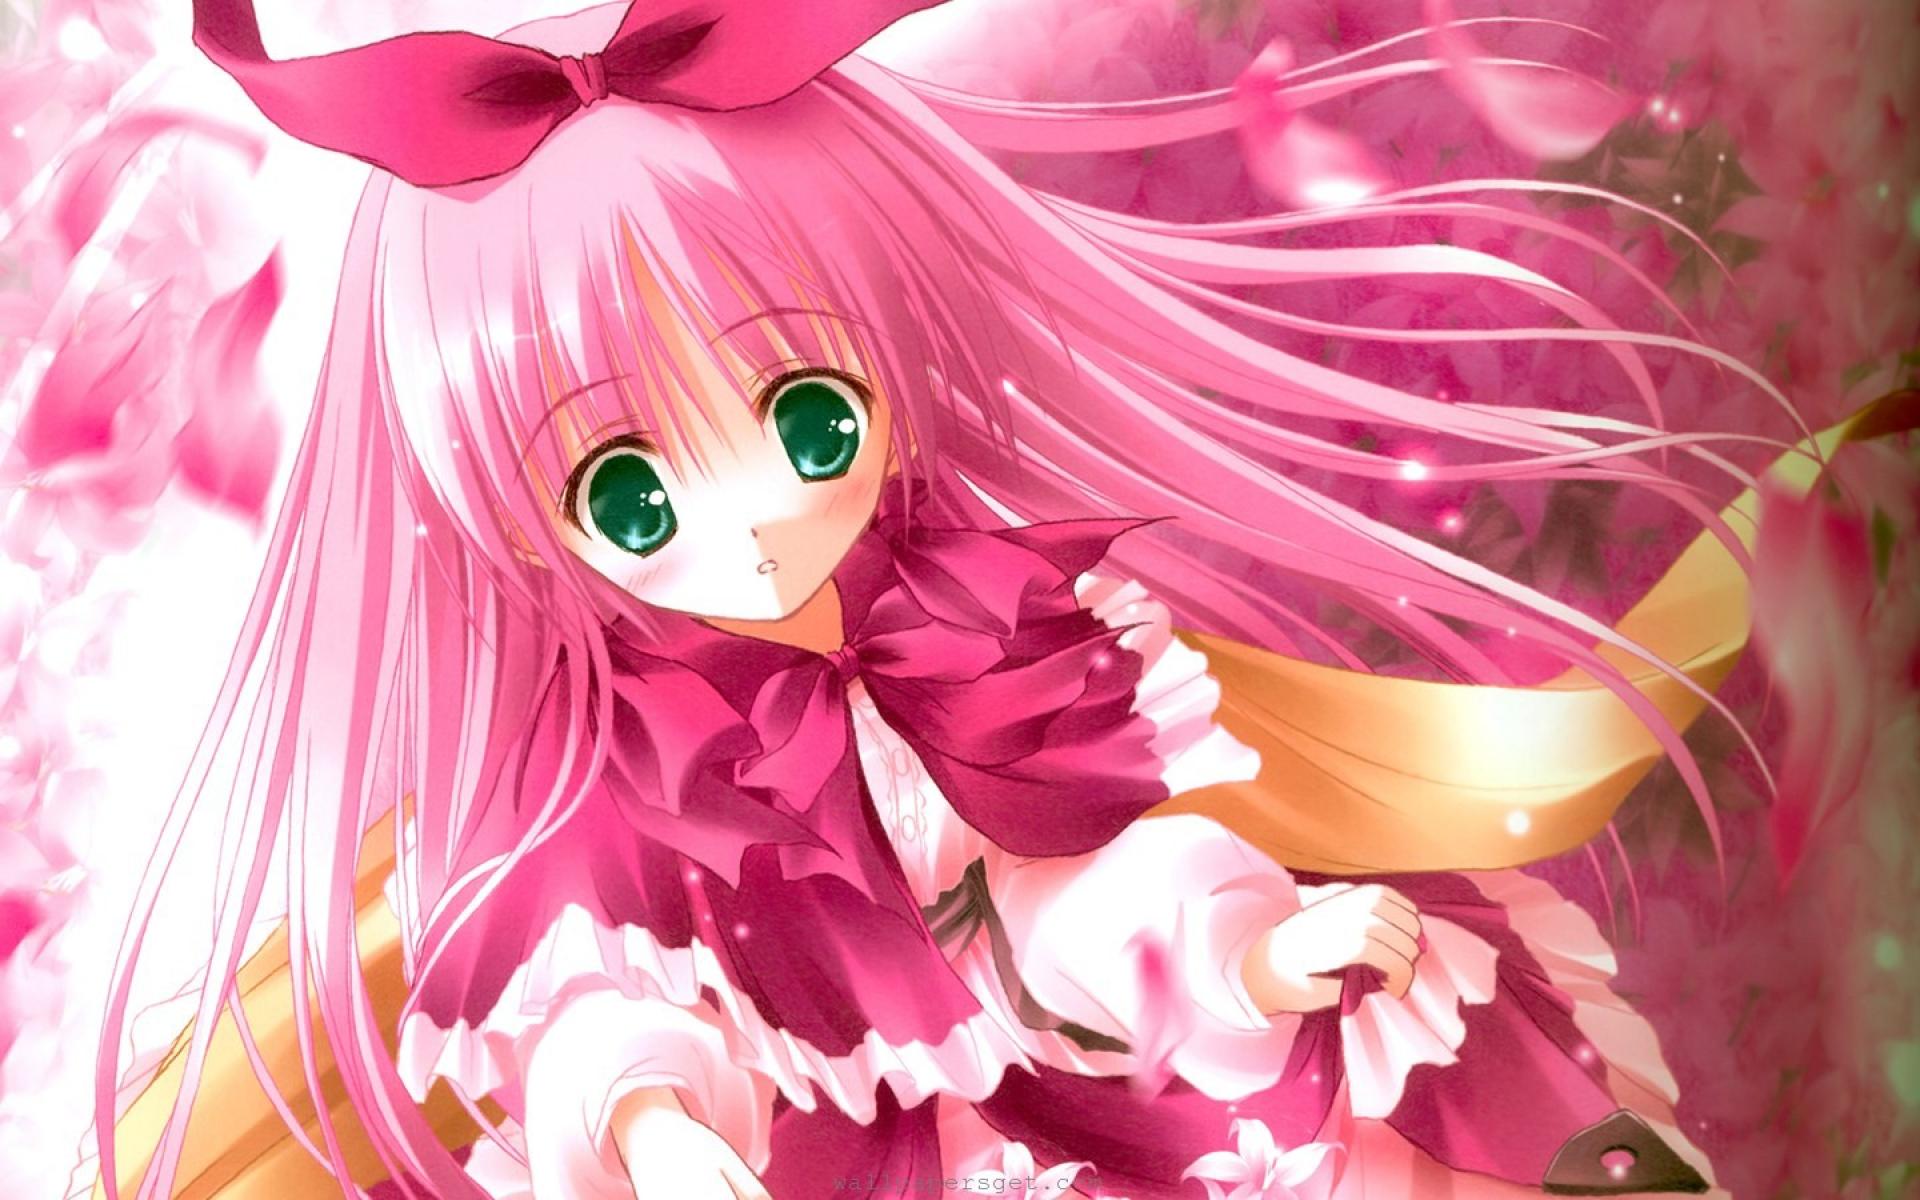 2. Cute anime girl with pink hair and blue eyes - wide 7